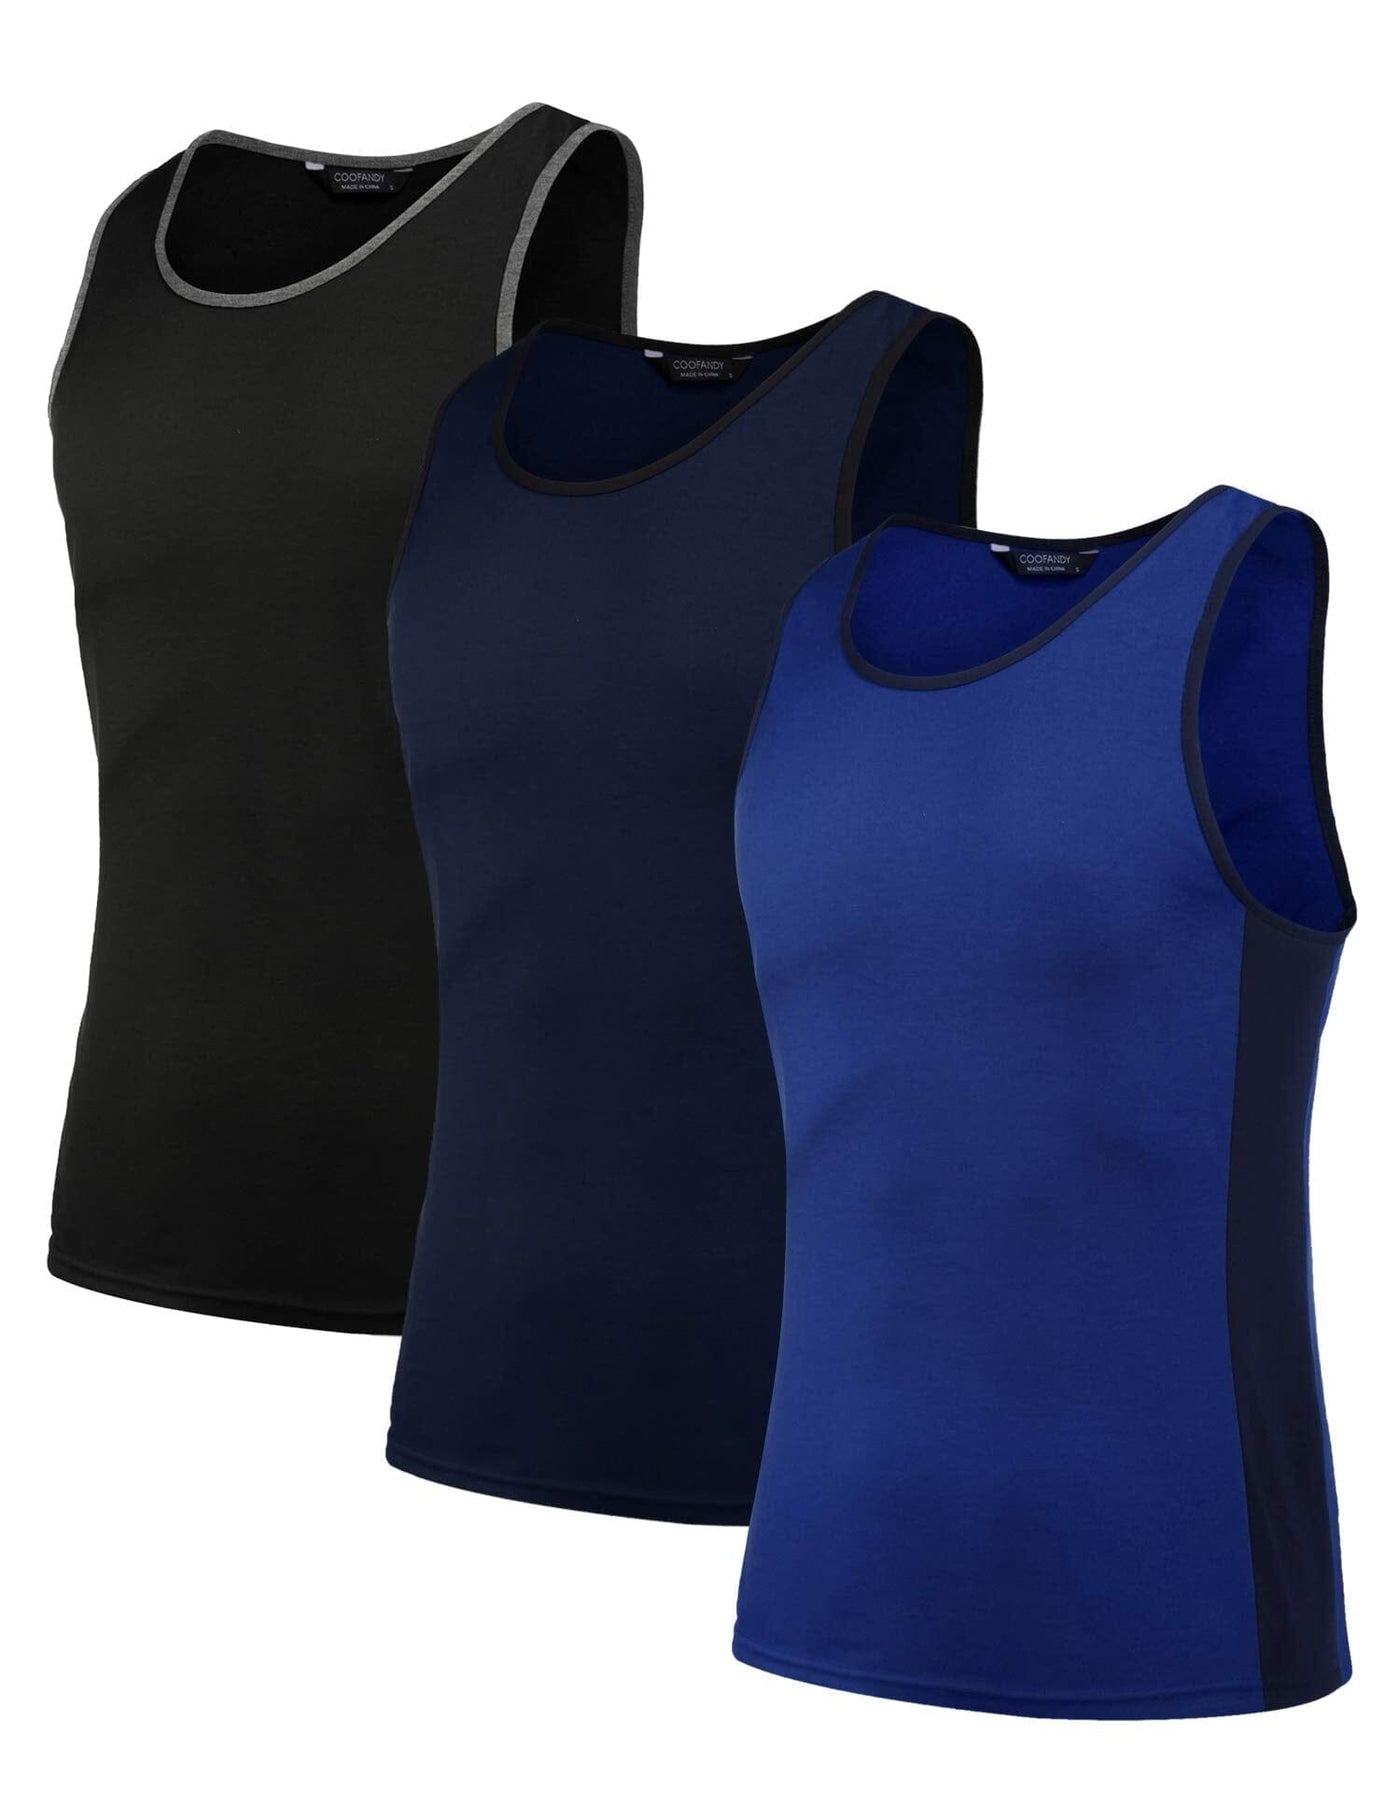 Coofandy 3 Pack Workout Tank Top (US Only) Tank Tops coofandy 